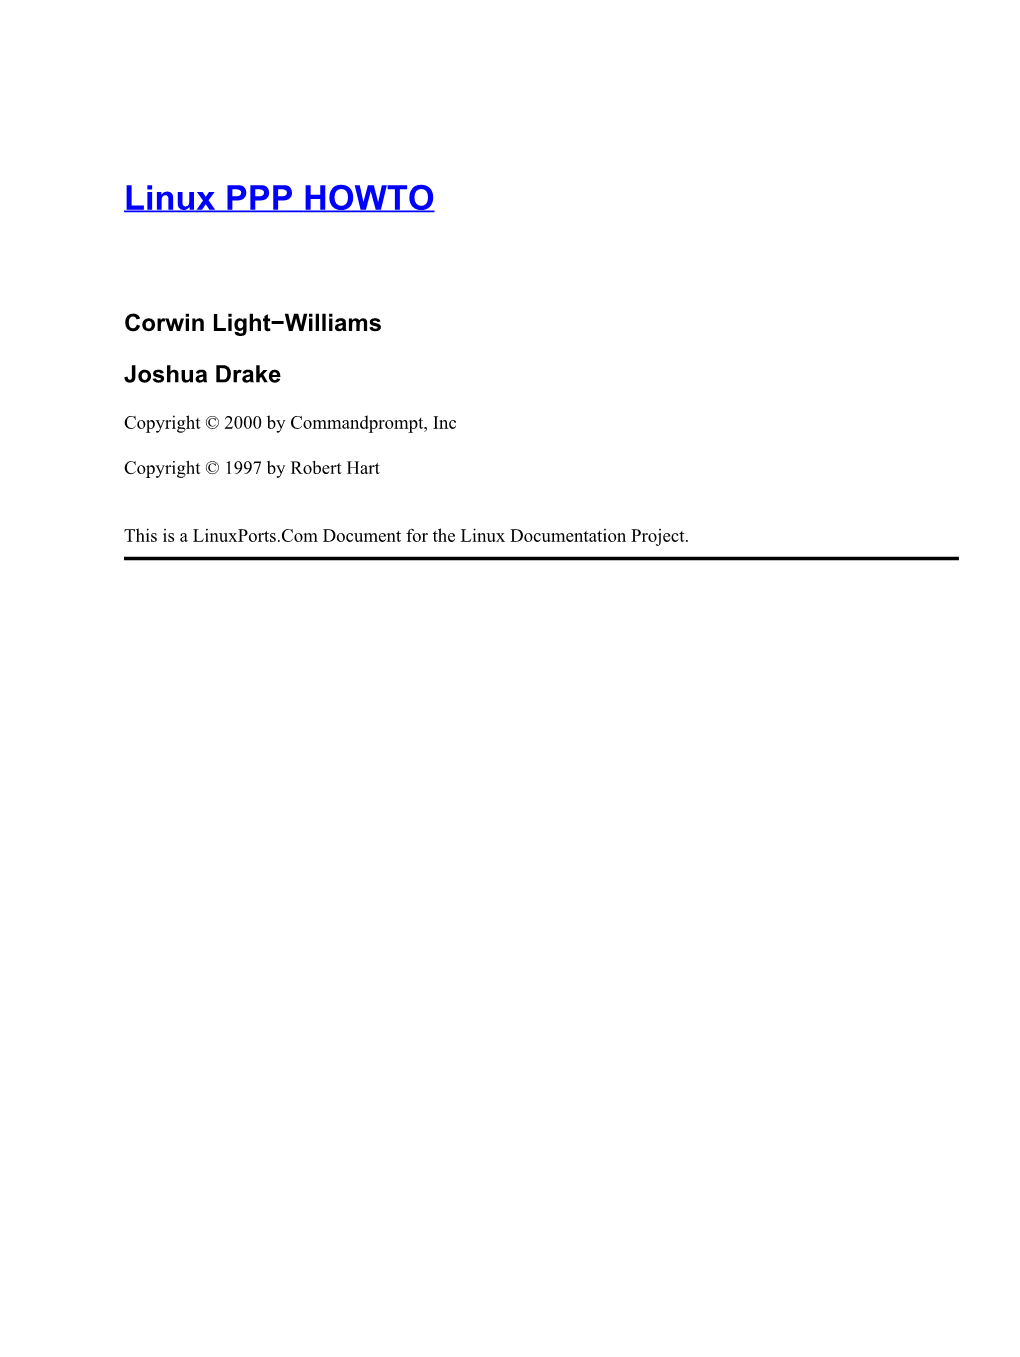 PPP-HOWTO.Pdf